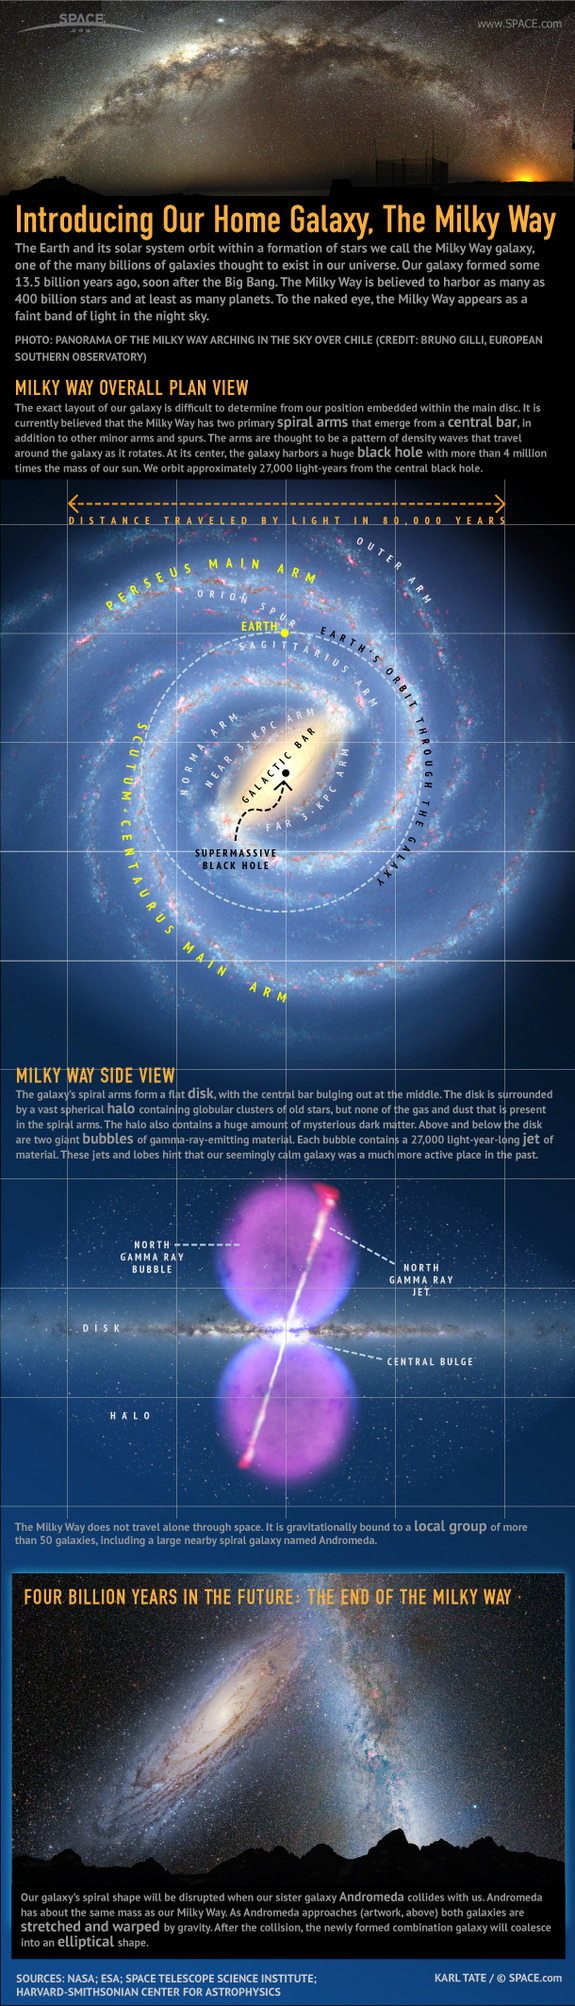 Find out all the facts about our home in space, the Milky Way galaxy, in this SPACE.com infographic.